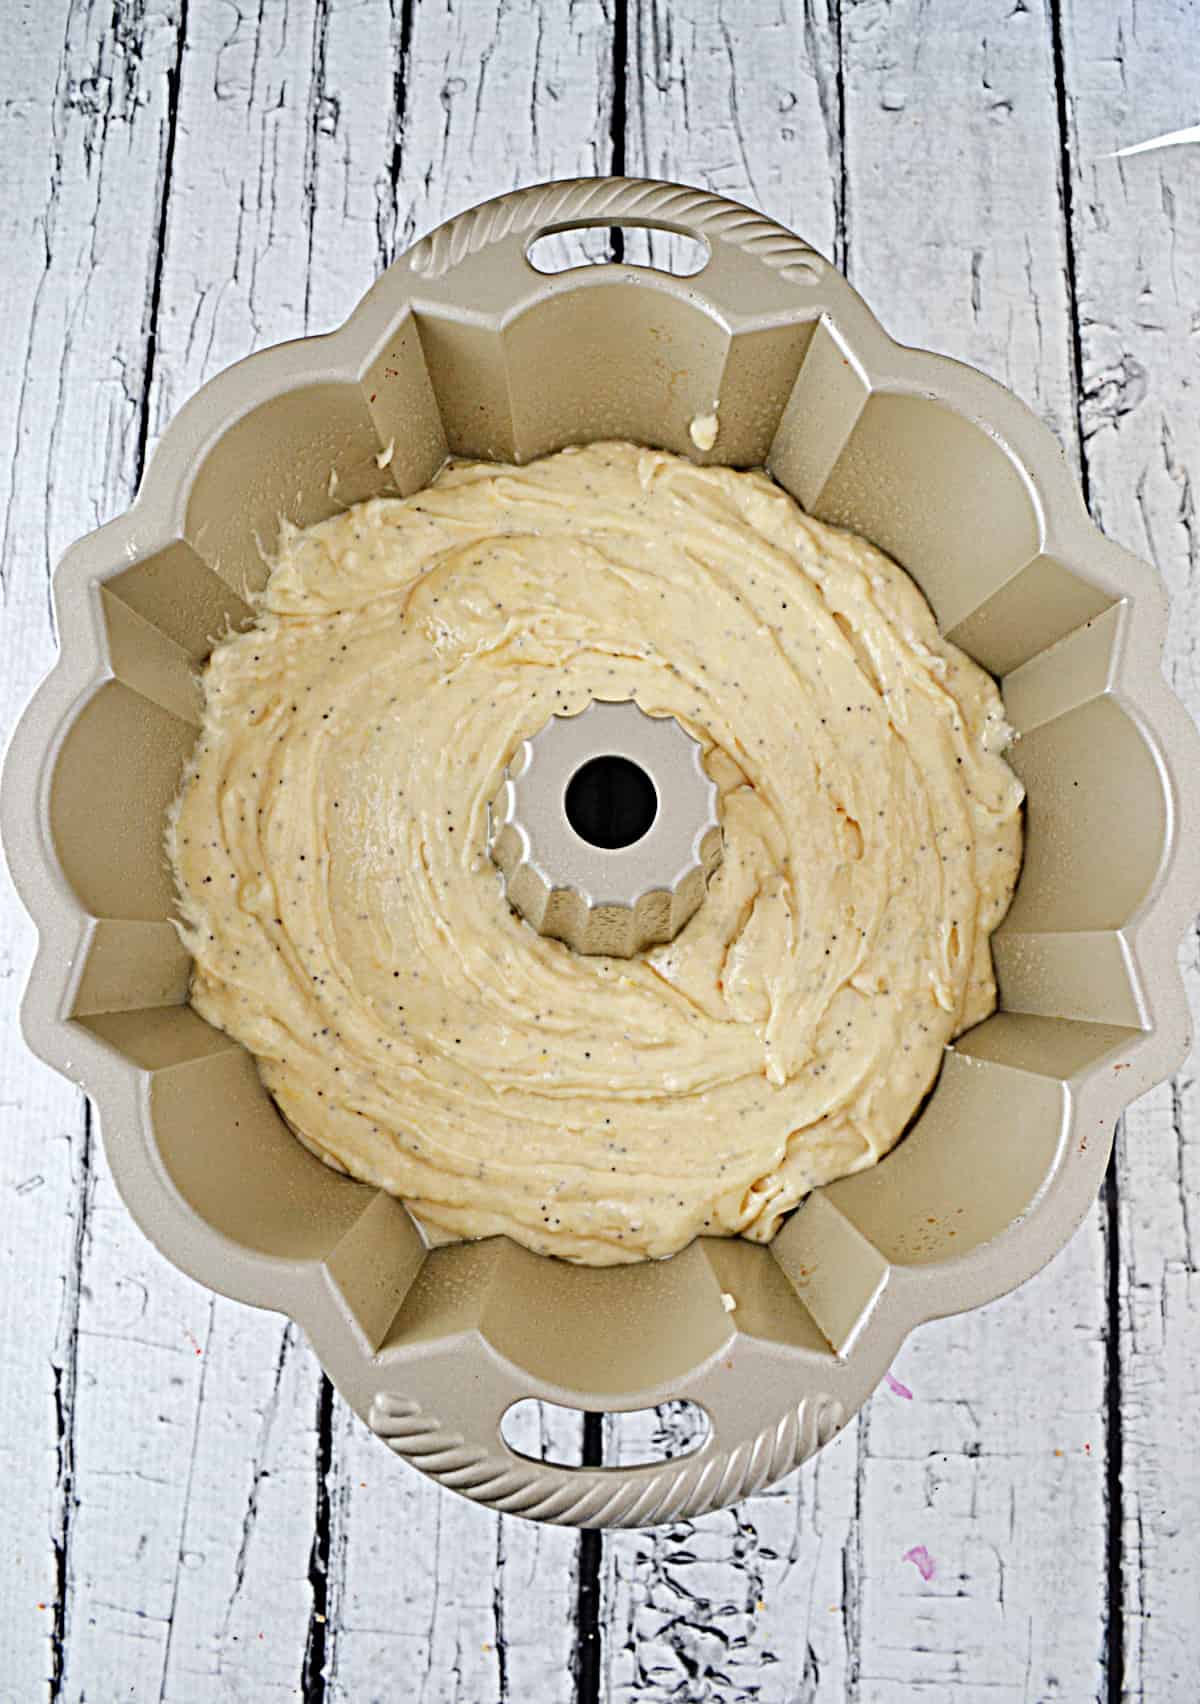 A Bundt pan with cake batter in it.